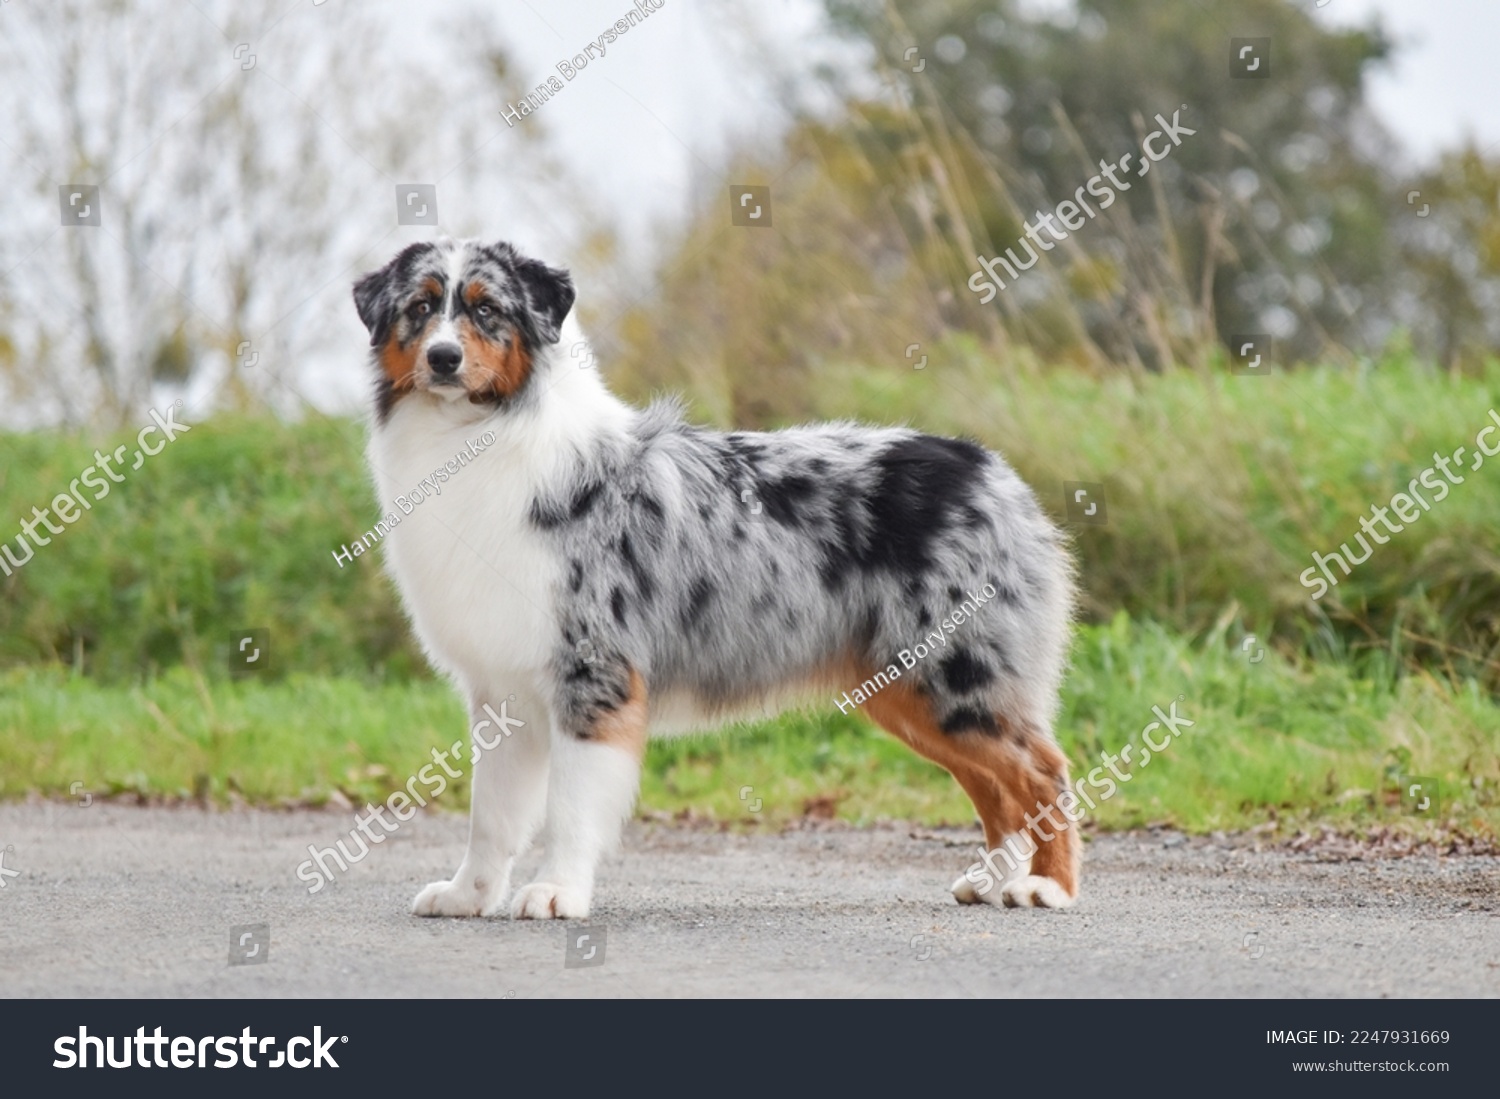 The dog australian shepherd stands sideways in full growth and looking at the camera #2247931669